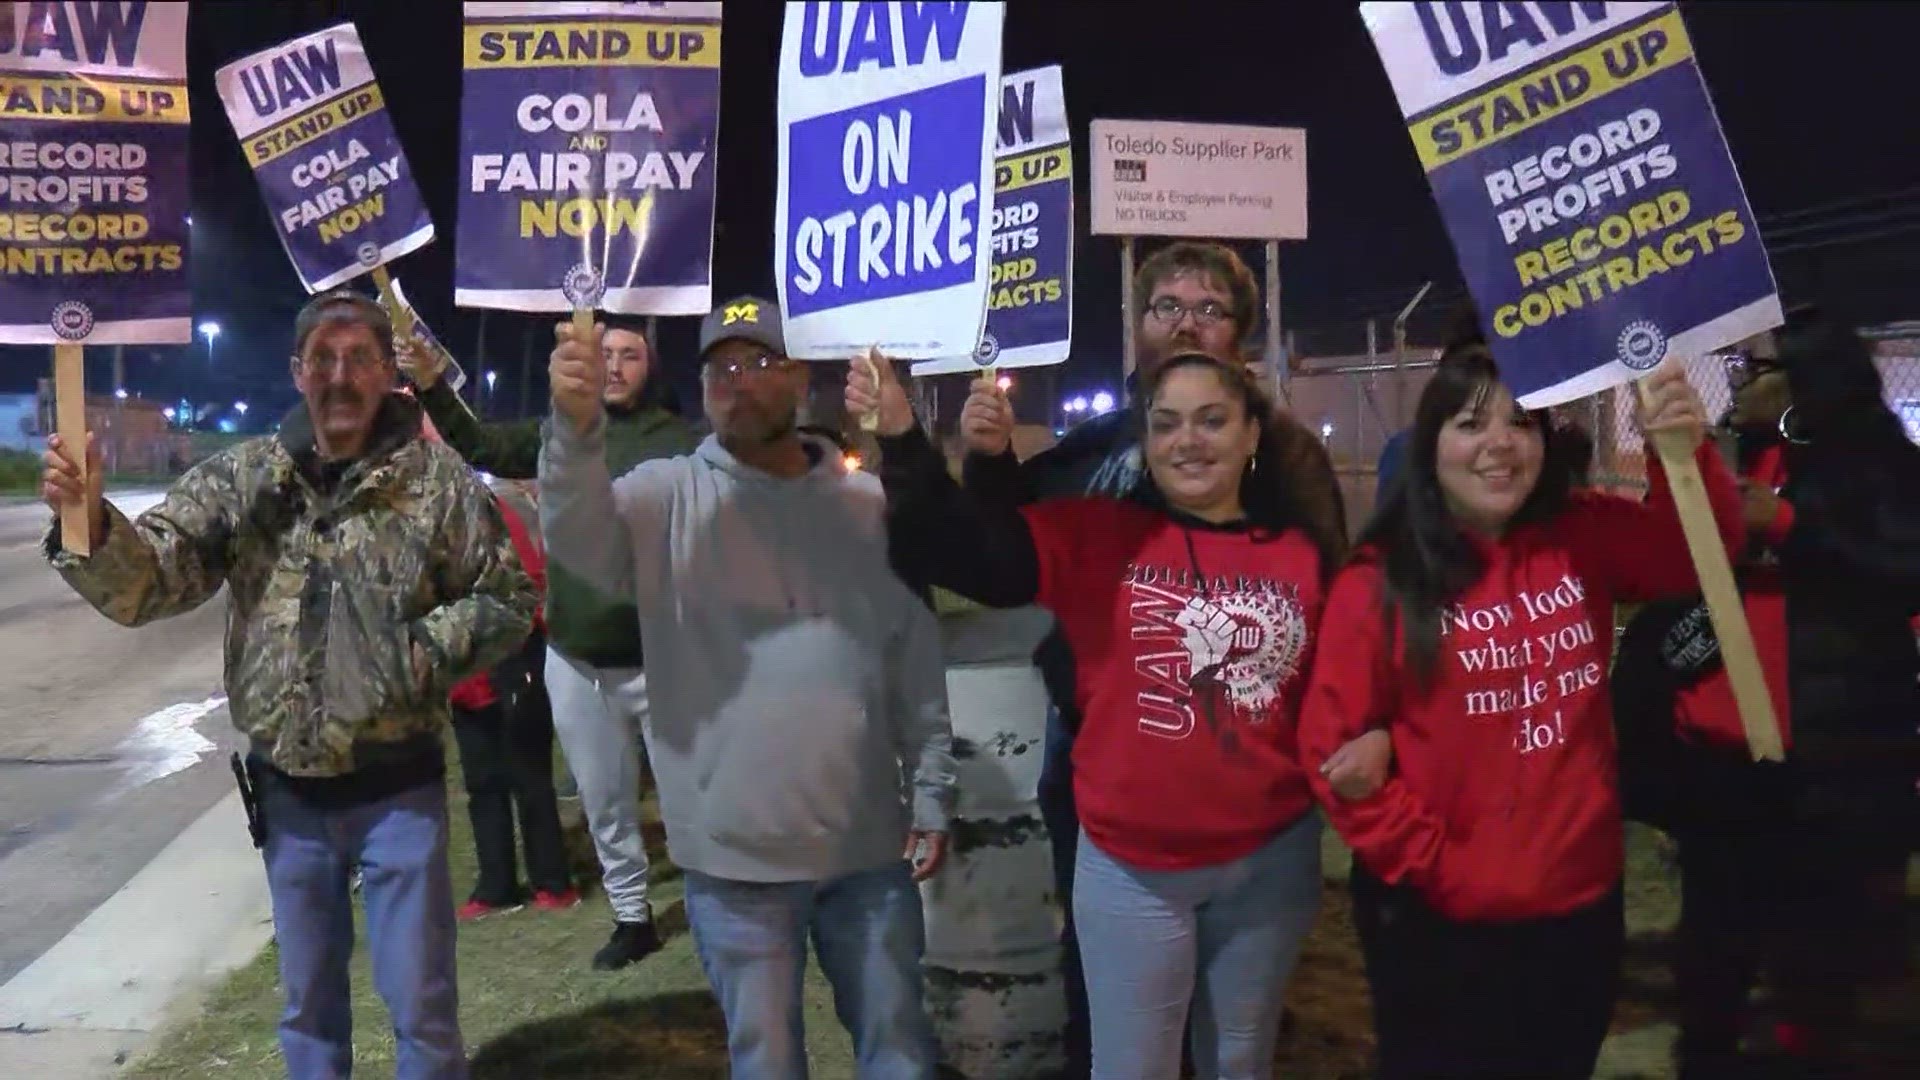 UAW members from near and far show solidarity and support to those on strike in Toledo.